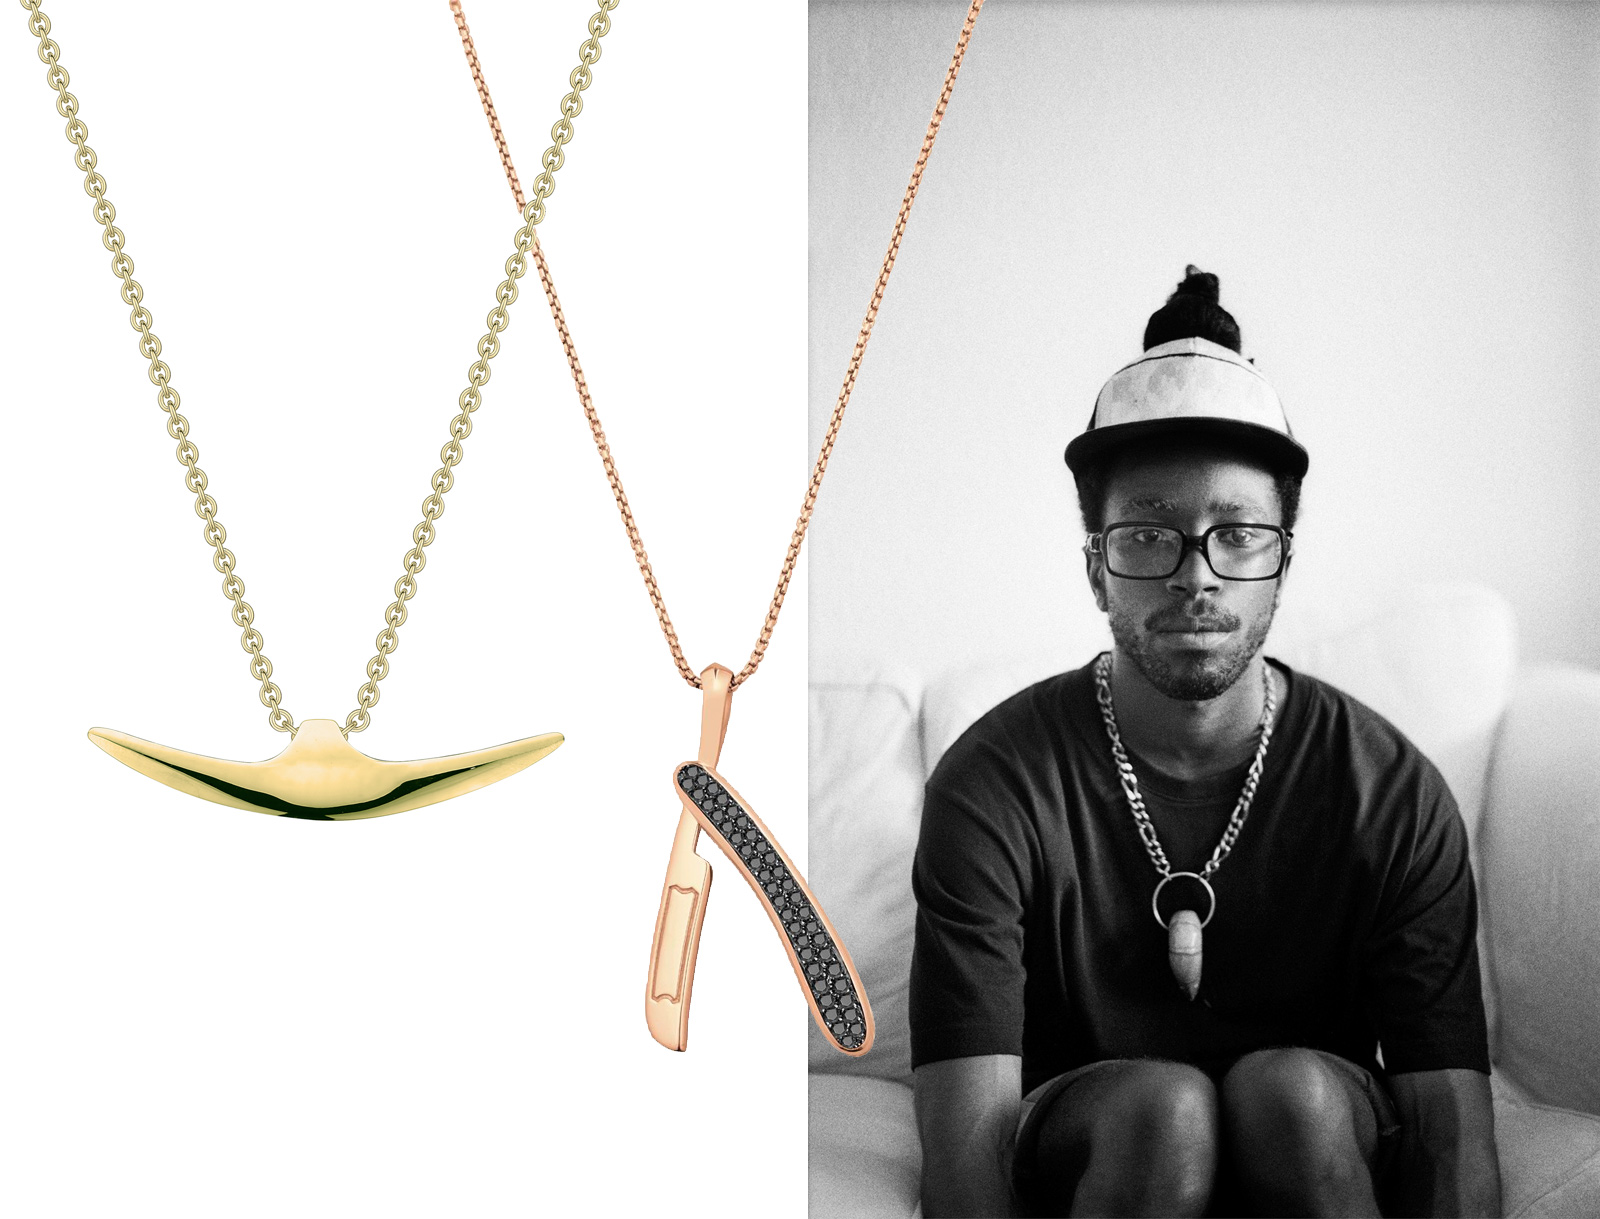 From left to right: Shaun Leane yellow gold necklace and Stephen Webster rose gold Switchblade necklace with black diamonds. Photo on the right by Ross Trevail from the Tomfoolery series